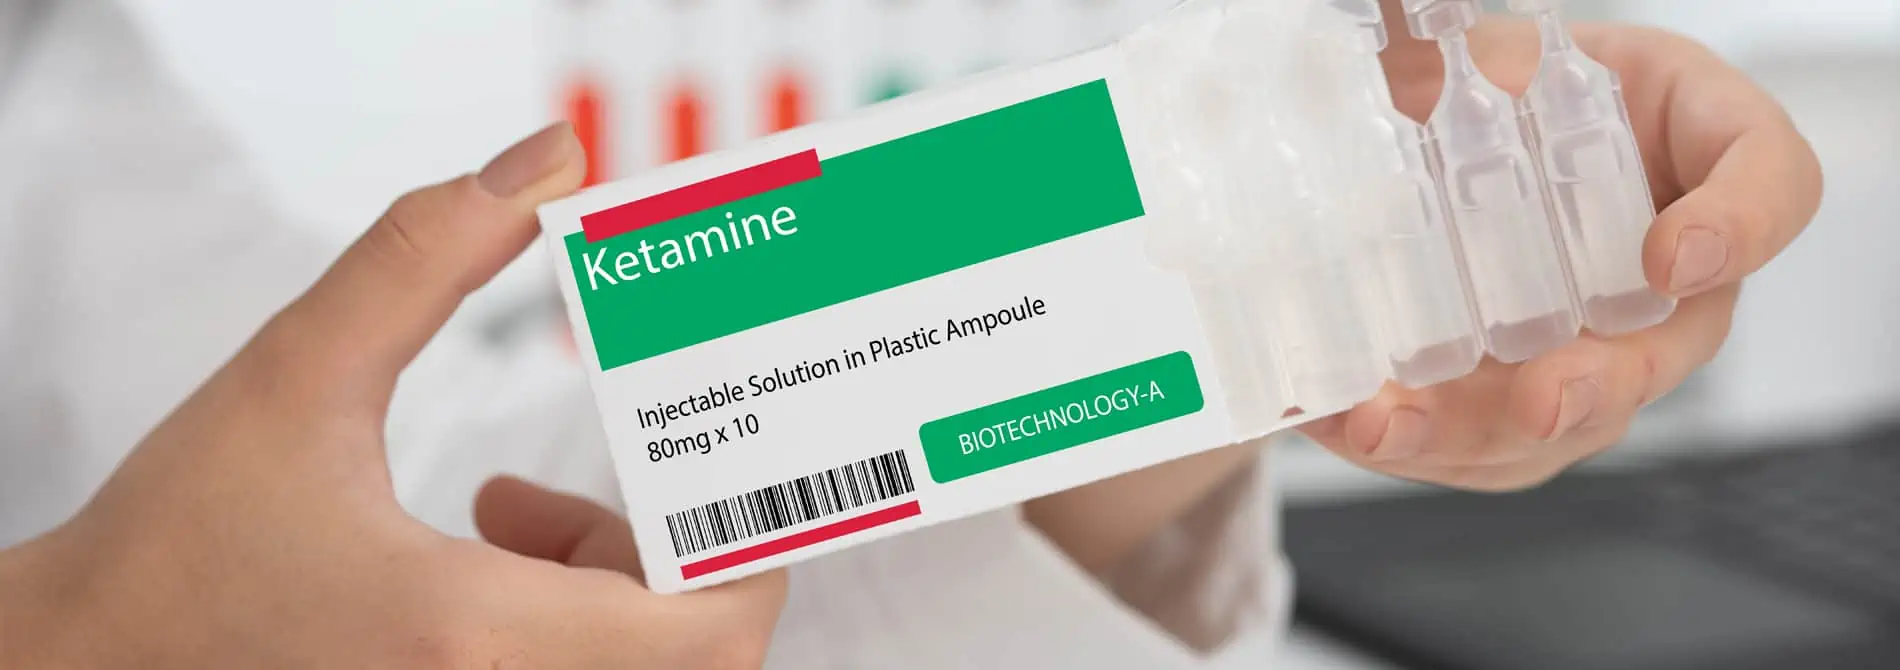 person holding Ketamine package